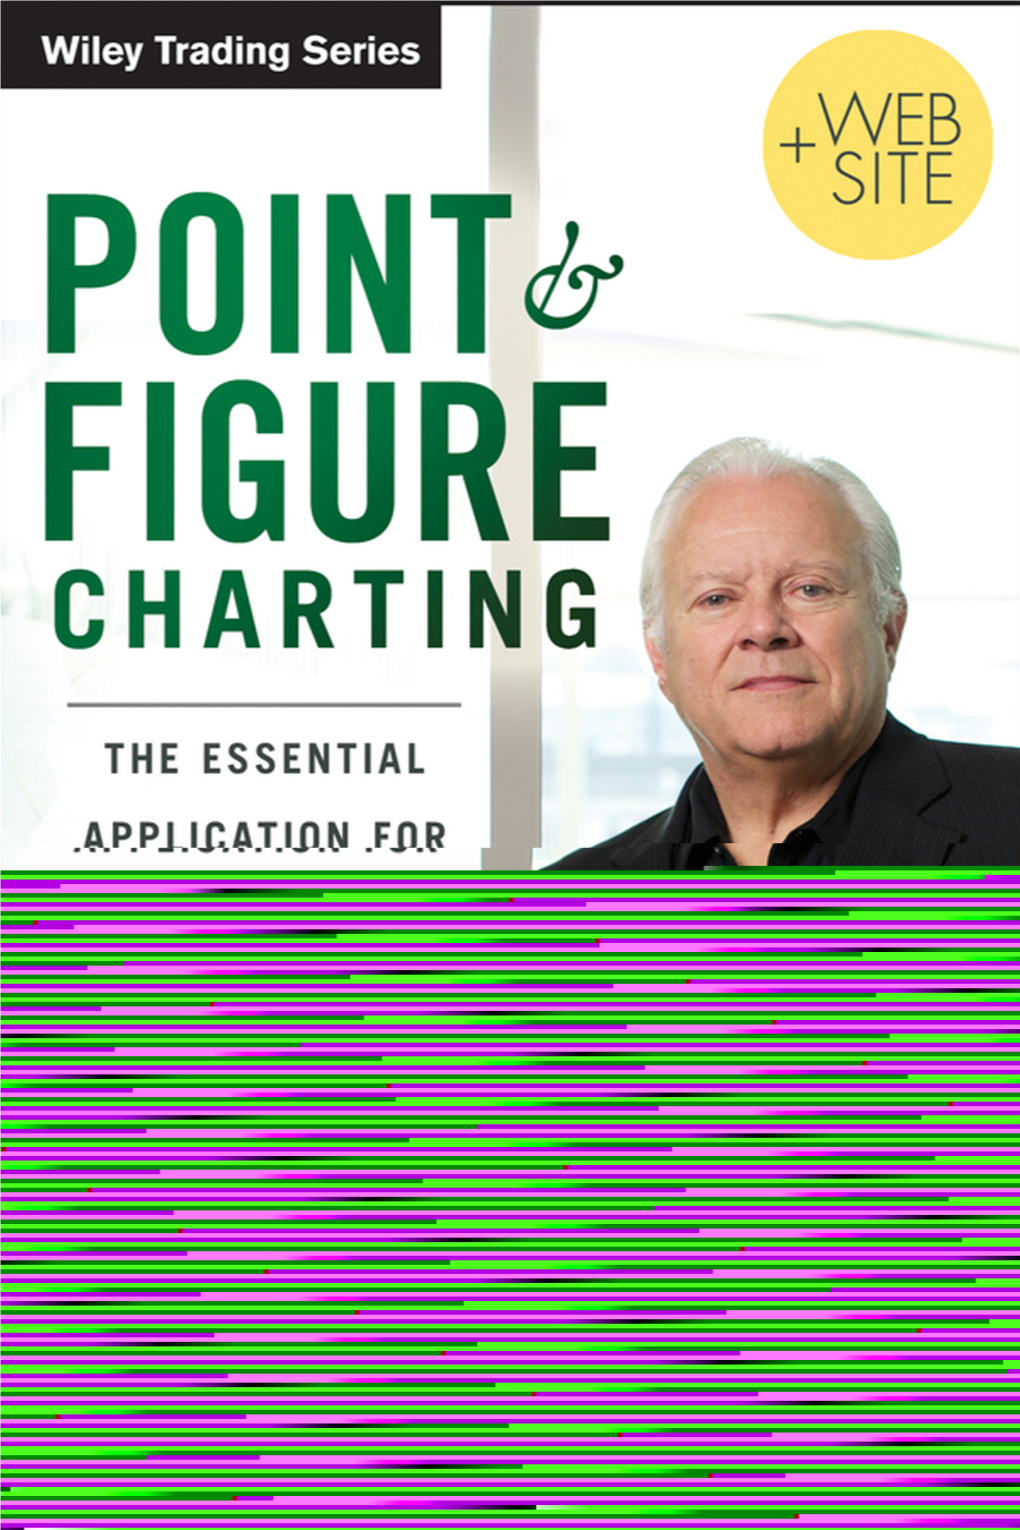 Point and Figure Charting Founded in 1807, John Wiley & Sons Is the Oldest Independent Publish- Ing Company in the United States